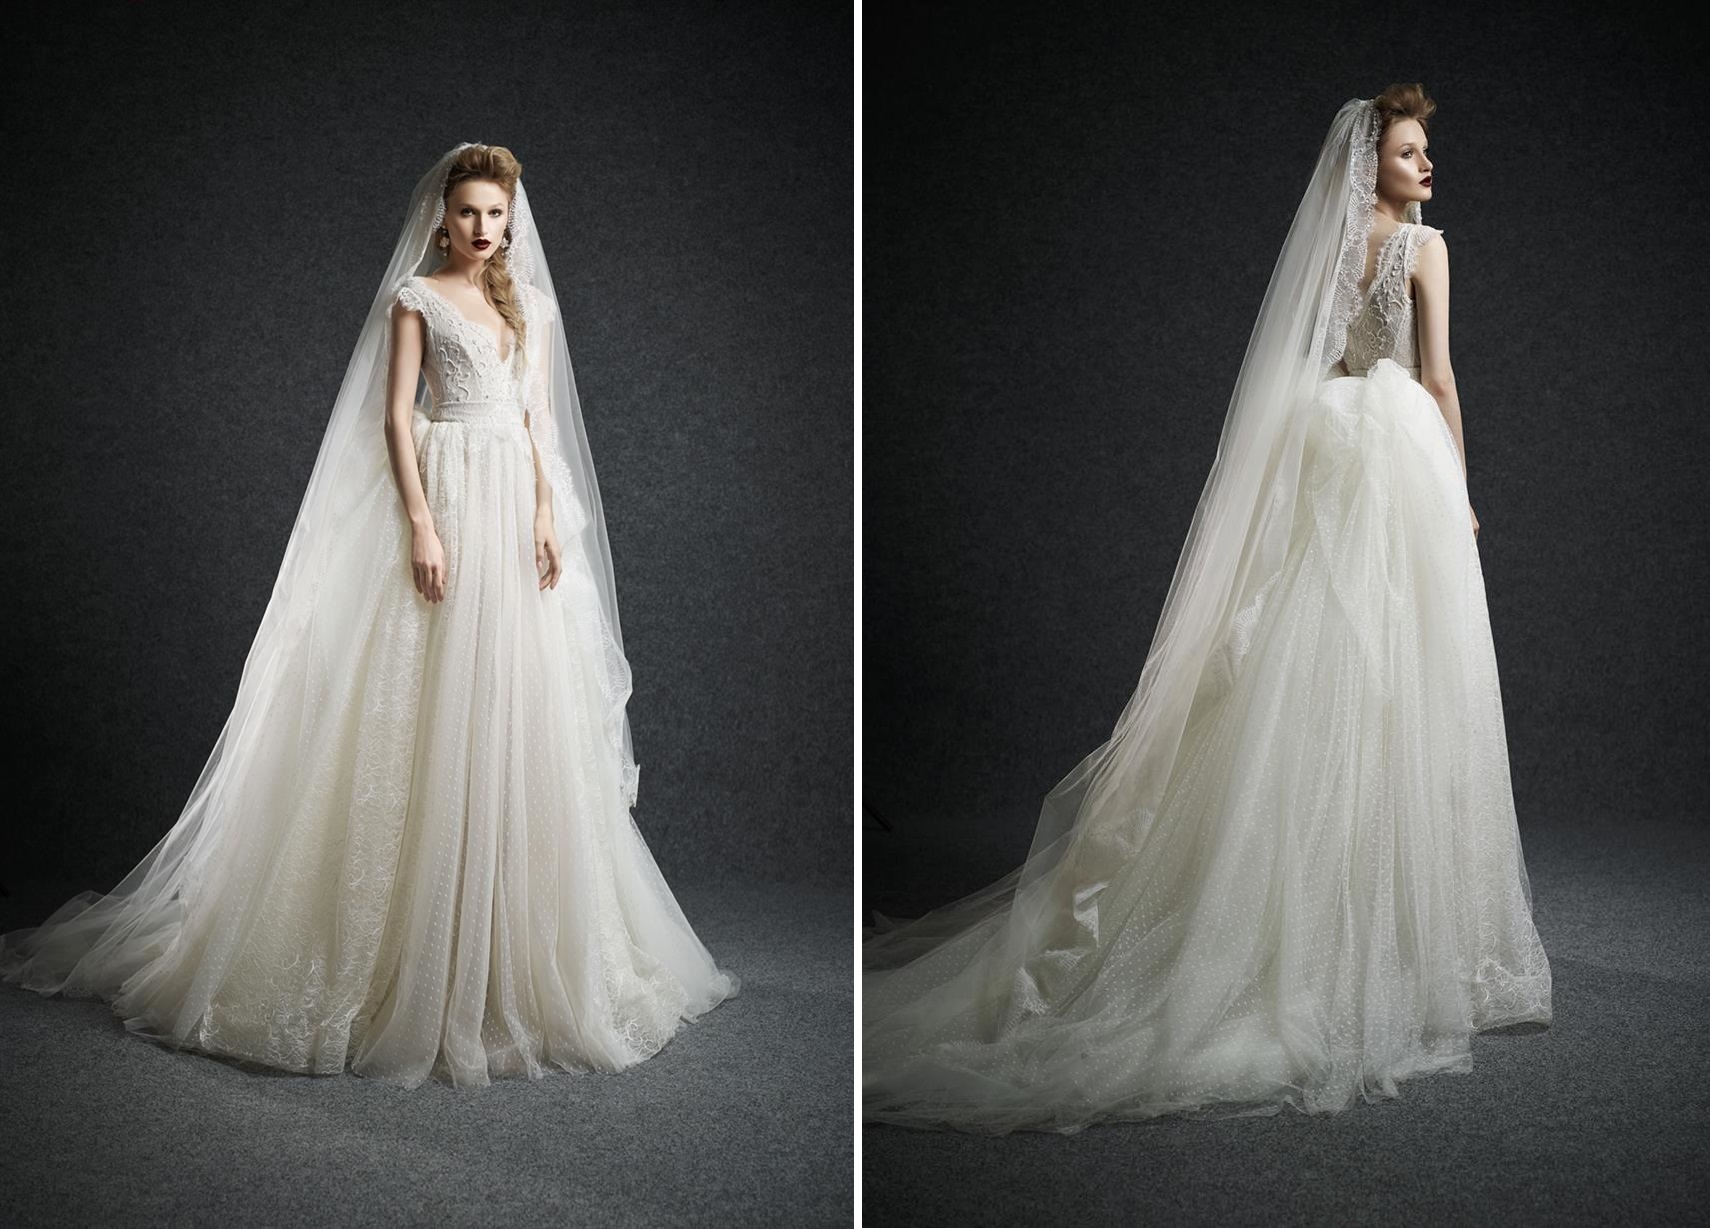 2015 Bridal Collection from Ersa Atelier - Maeve